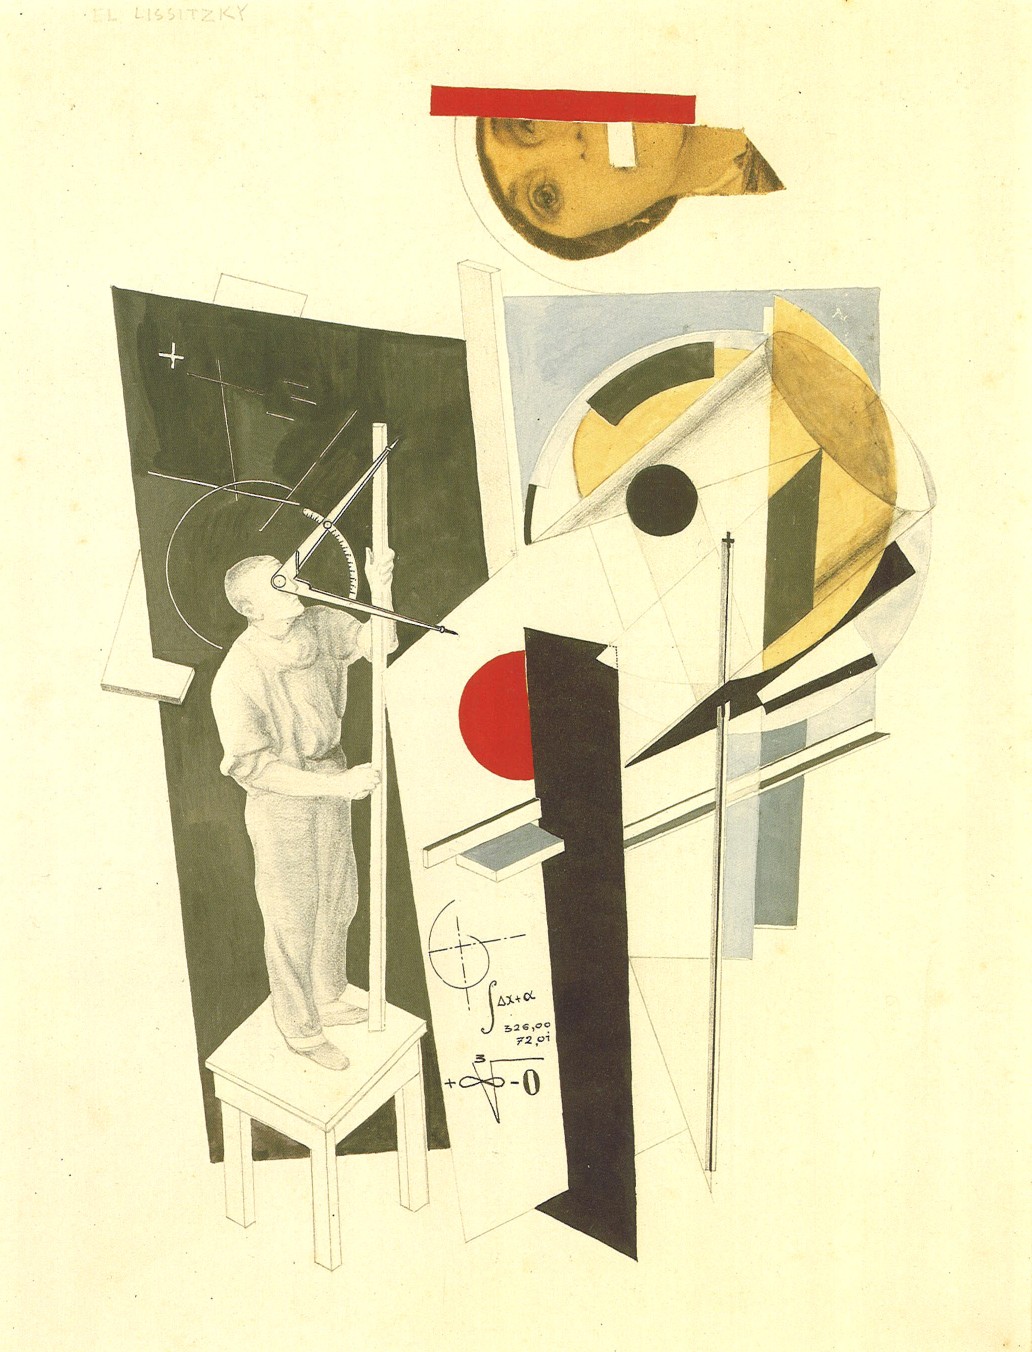 El Lissitzky, Tatlin at Work on the Monument to the Third International (1922)